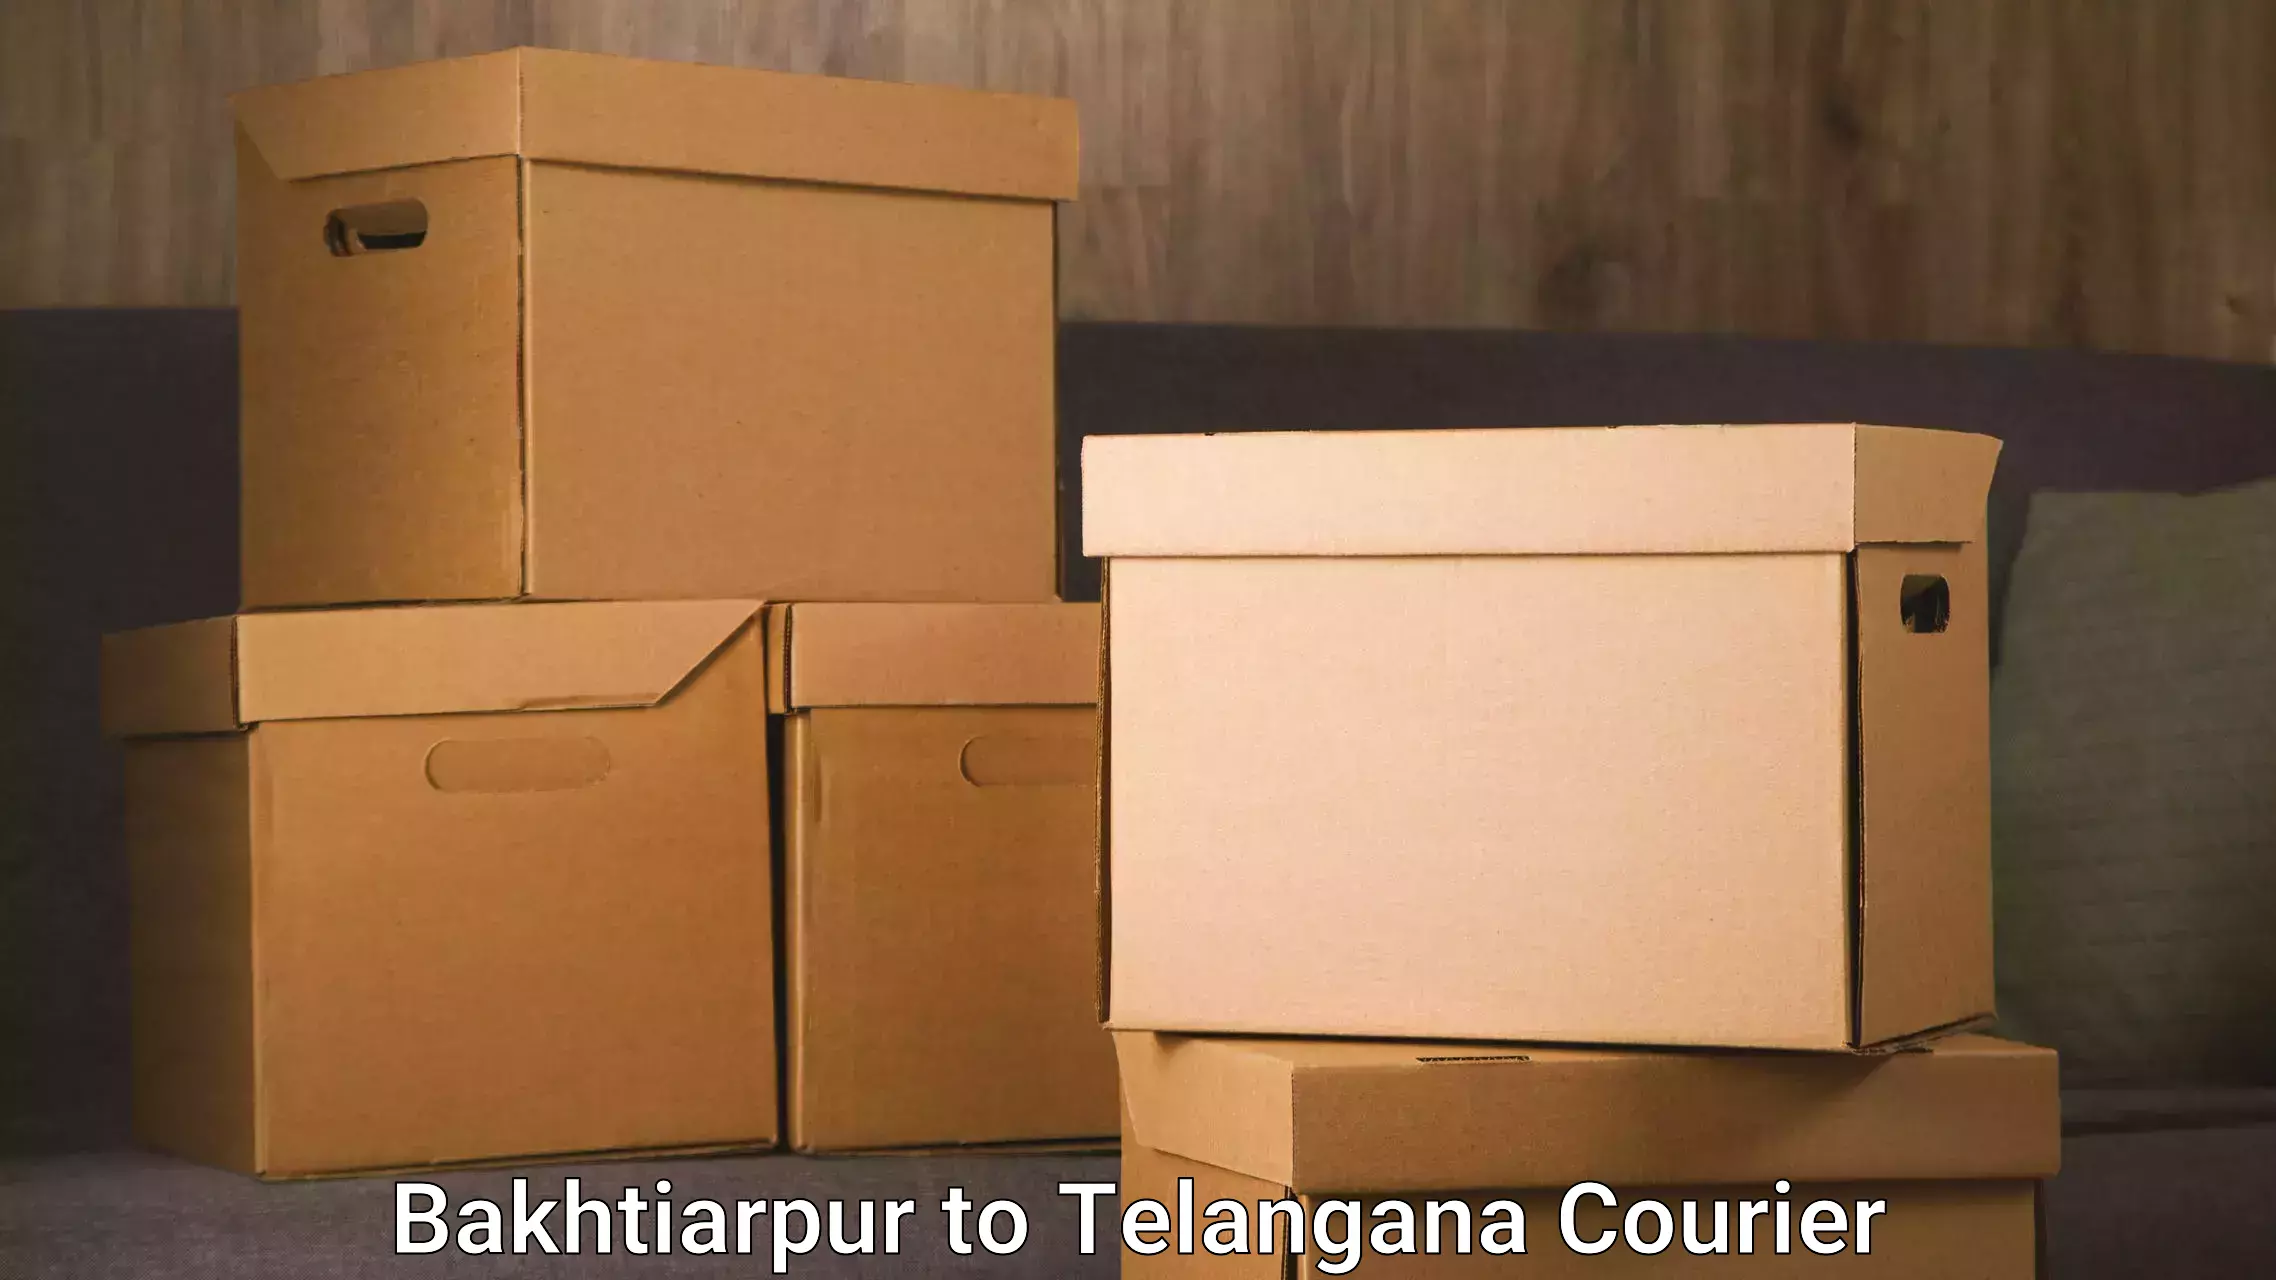 Trusted relocation experts Bakhtiarpur to Amangal